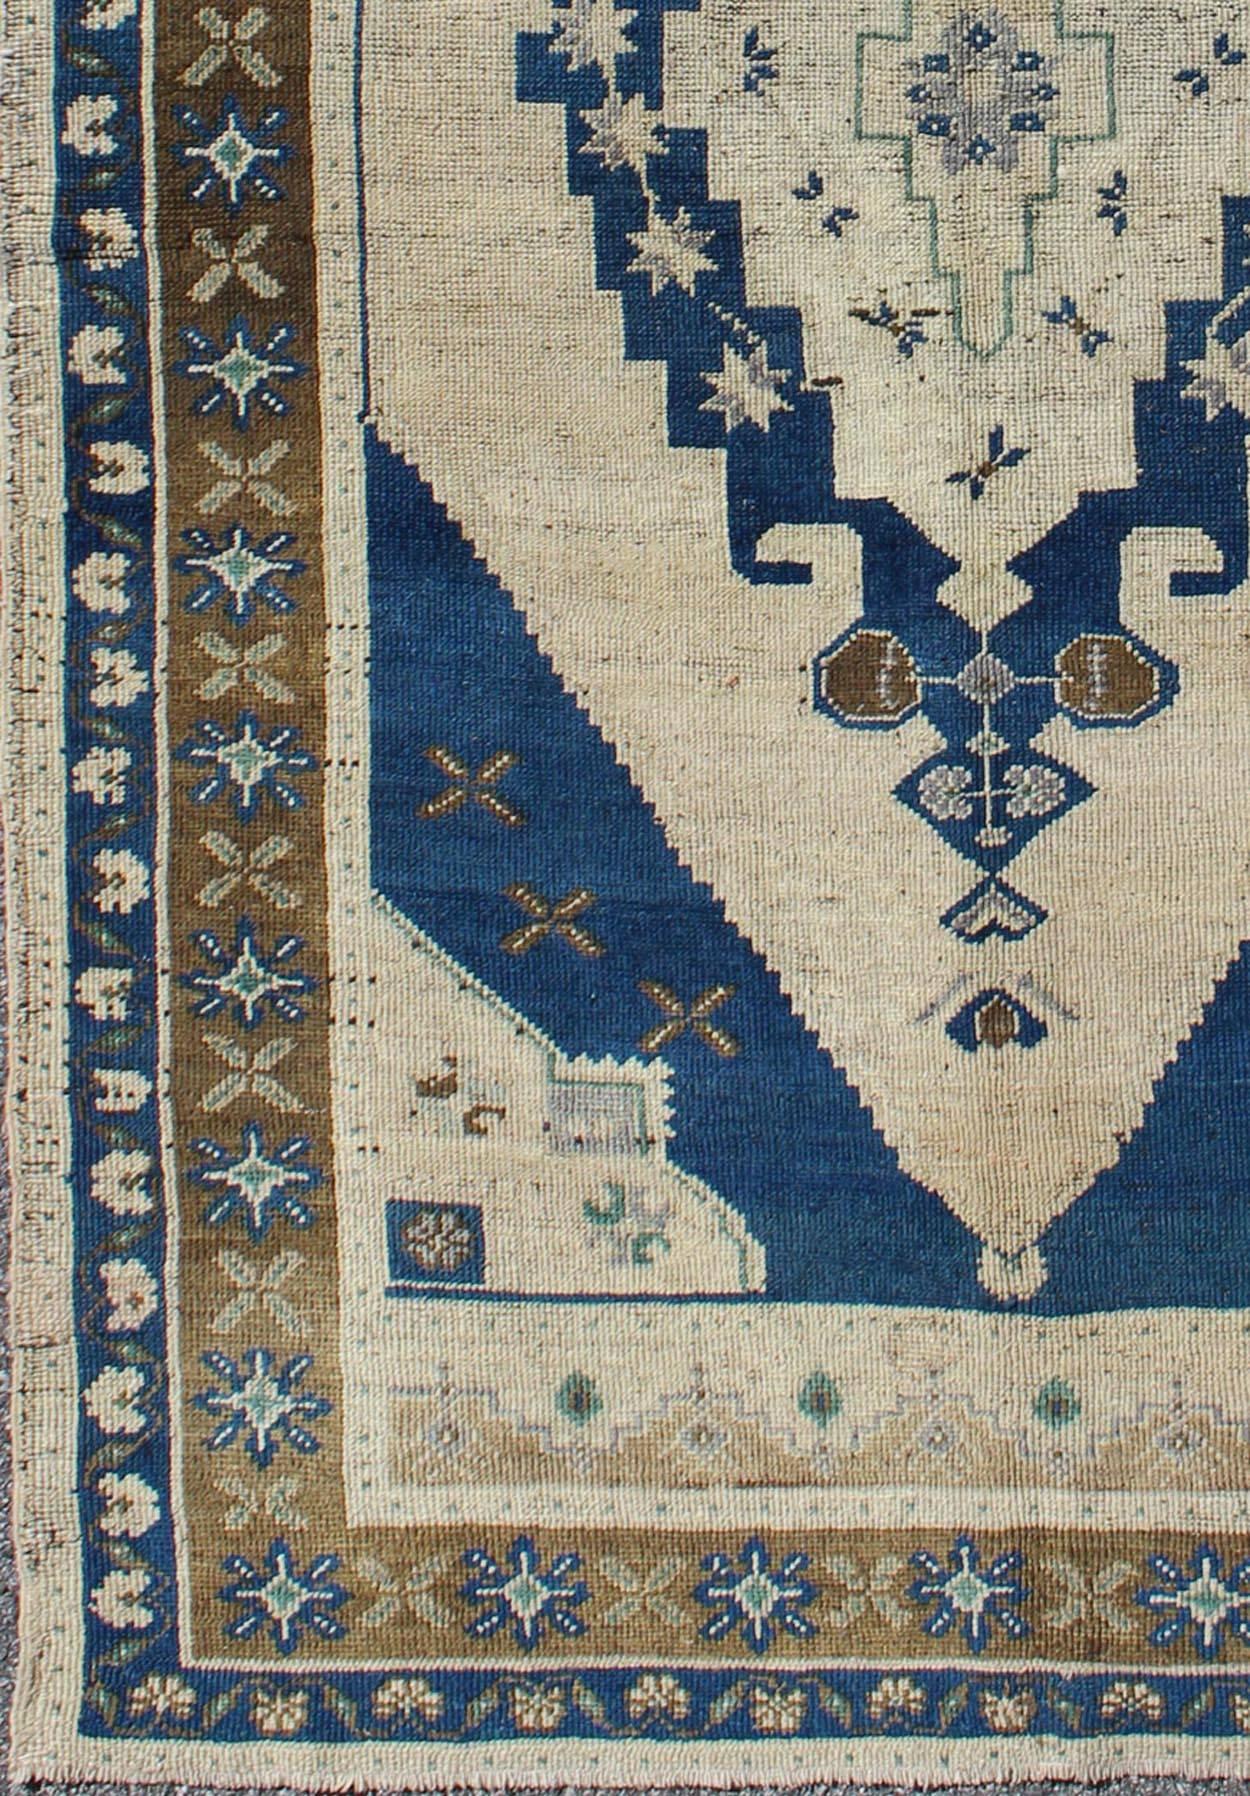 Vintage Turkish Oushak Rug in Navy Blue, Ivory, Taupe and Brown, rug tu-9305, country of origin / type: Turkey / Oushak, circa mid-20th century.

This vintage Turkish Oushak carpet (circa mid-20th century) features a central, multi-layered medallion